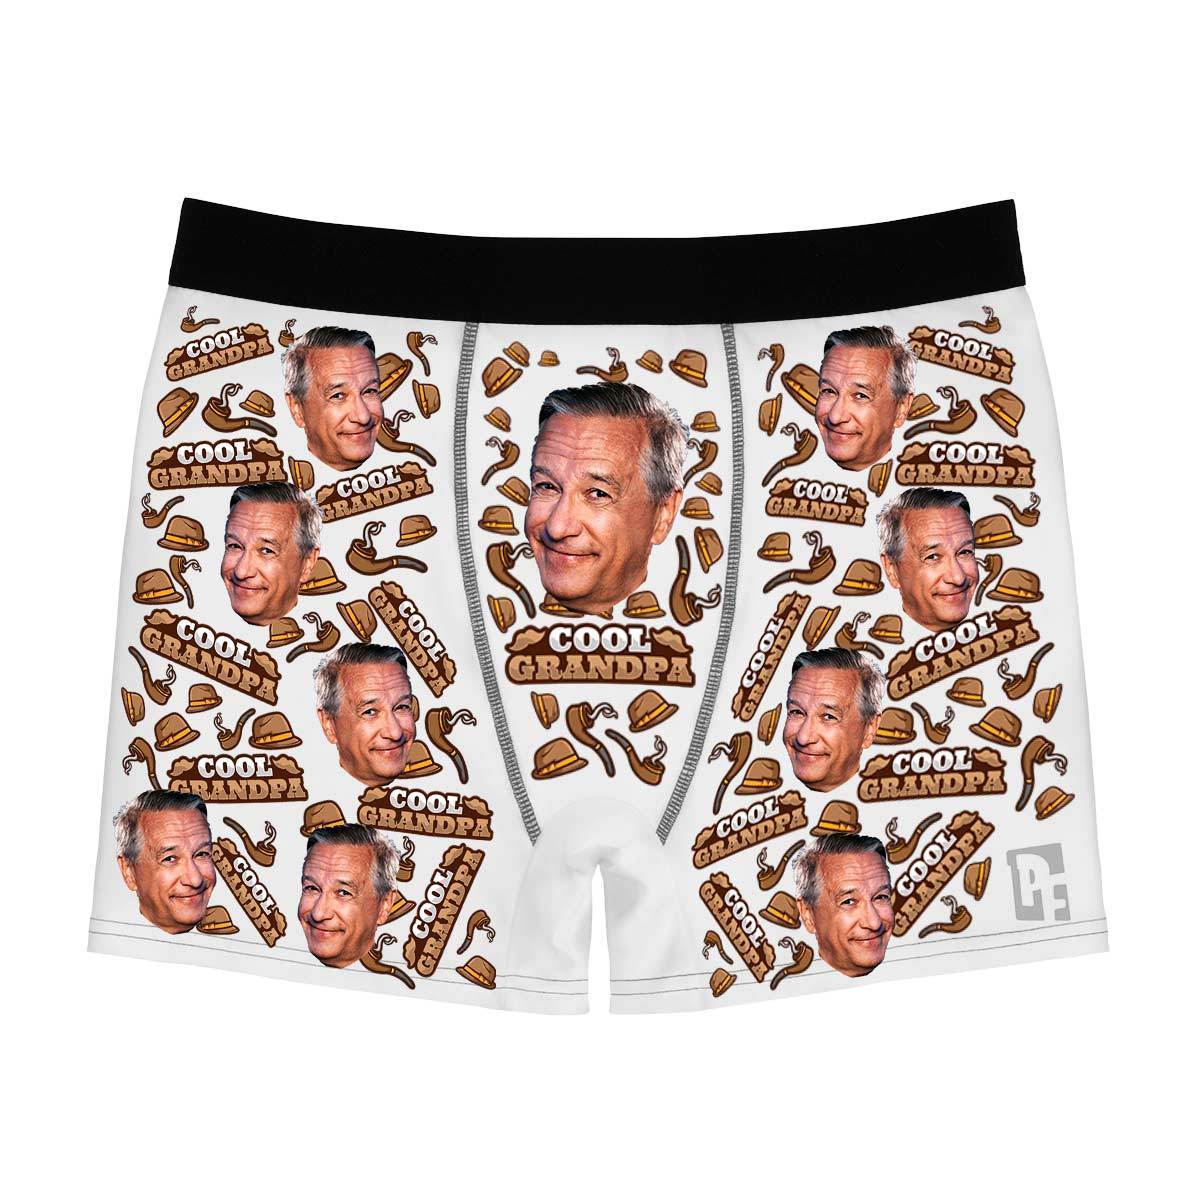 White Cool Grandfather men's boxer briefs personalized with photo printed on them